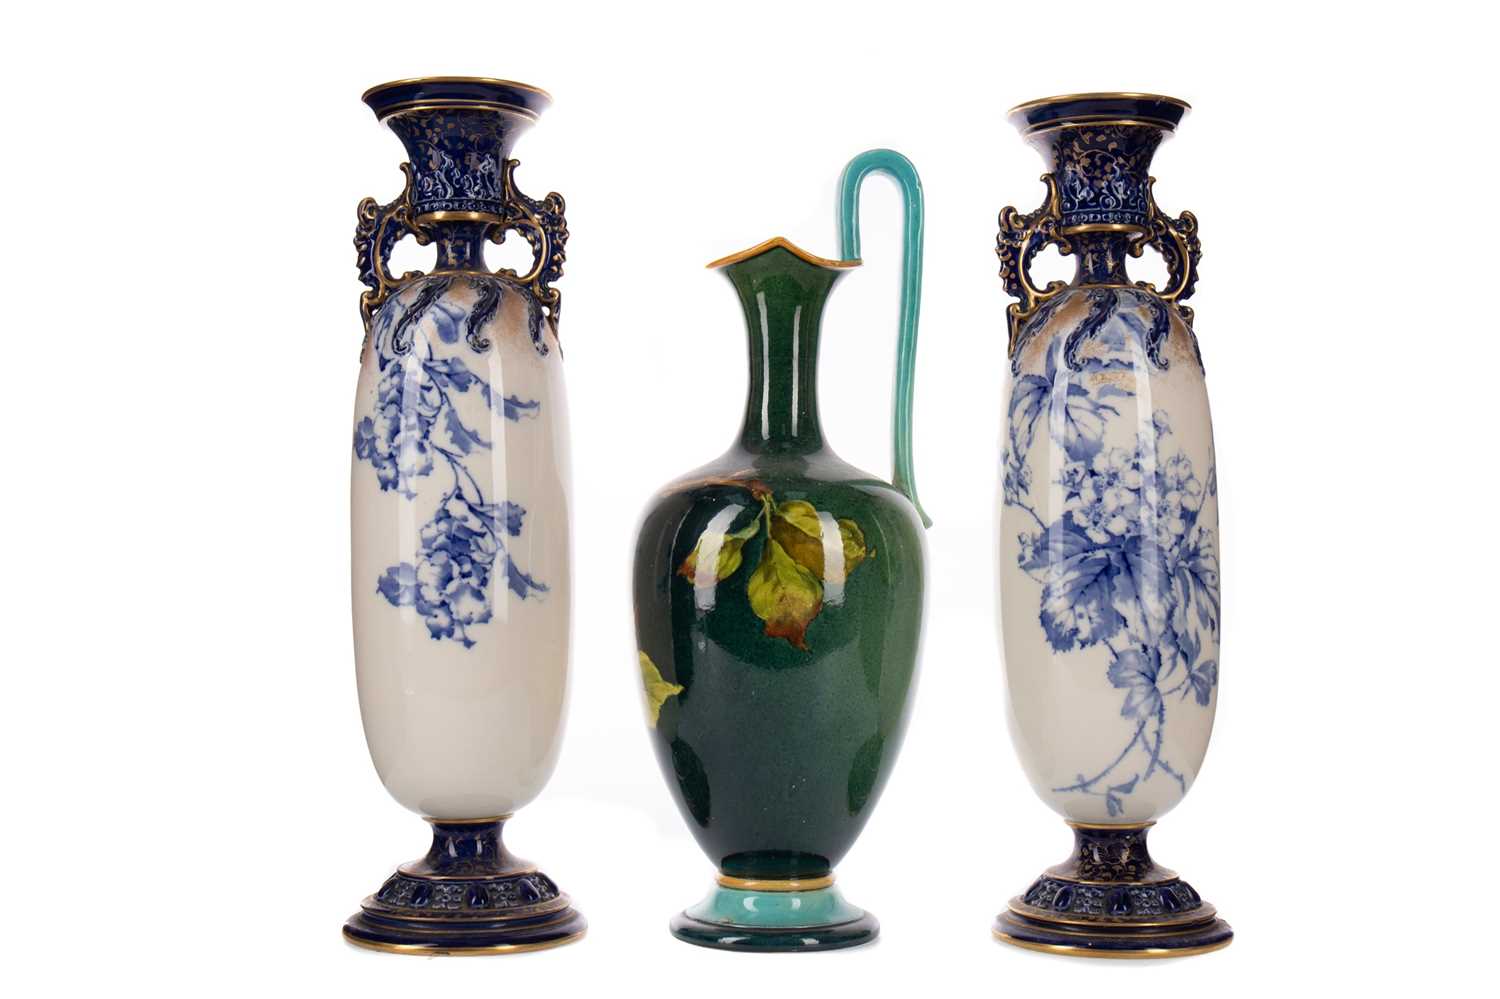 Lot 777 - A PAIR OF ROYAL DOULTON VASES, ALONG WITH A EWER